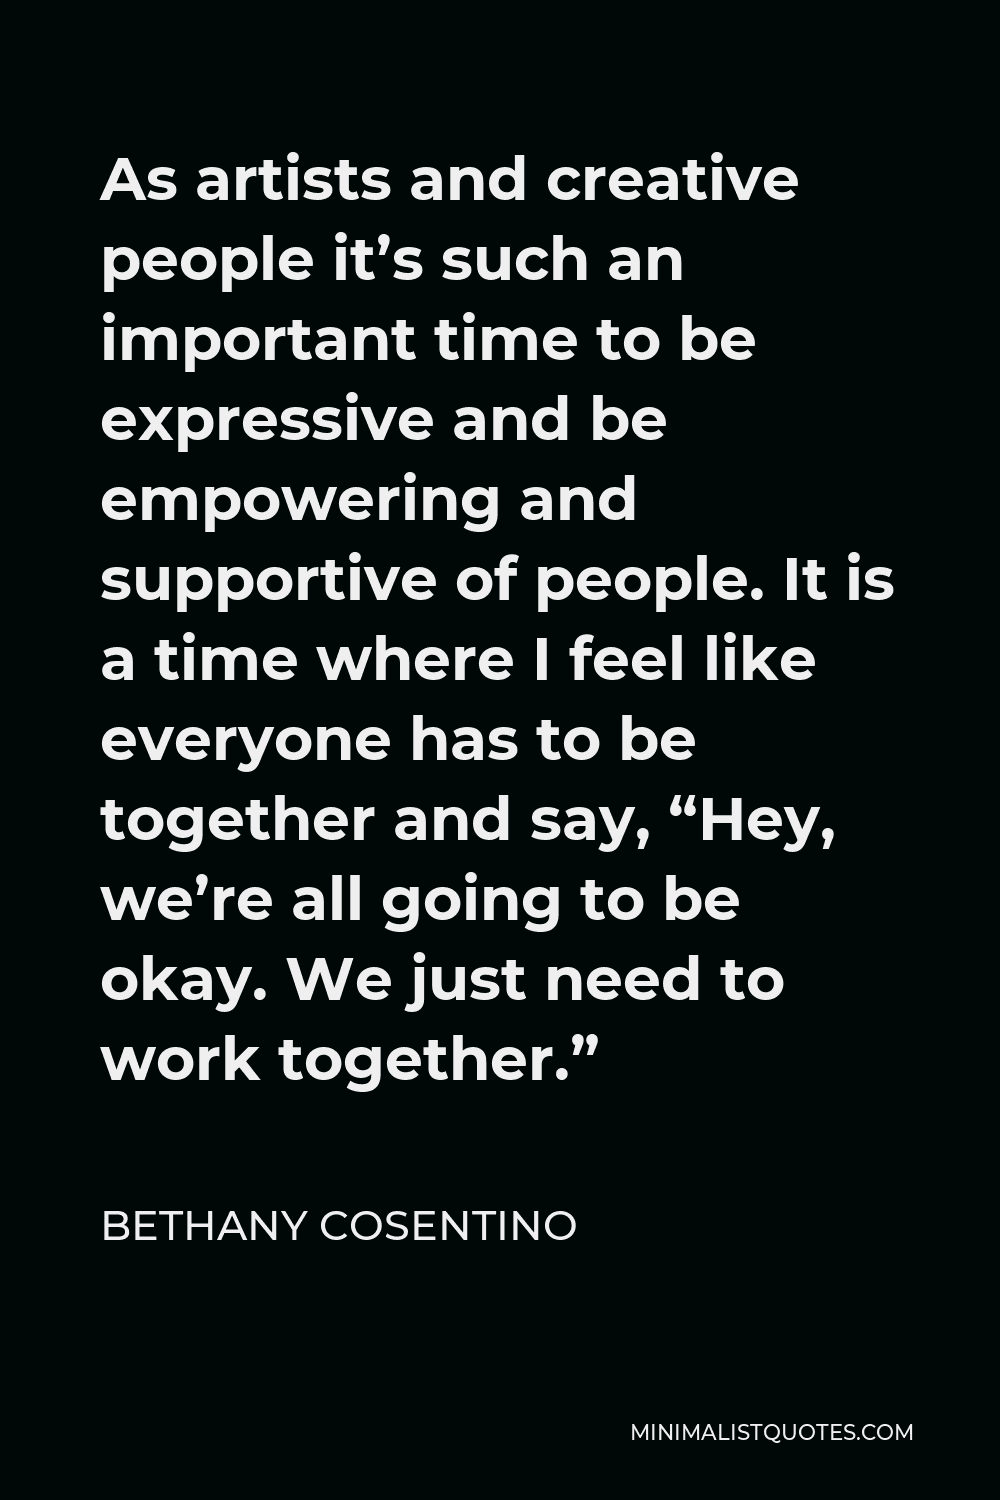 Bethany Cosentino Quote - As artists and creative people it’s such an important time to be expressive and be empowering and supportive of people. It is a time where I feel like everyone has to be together and say, “Hey, we’re all going to be okay. We just need to work together.”